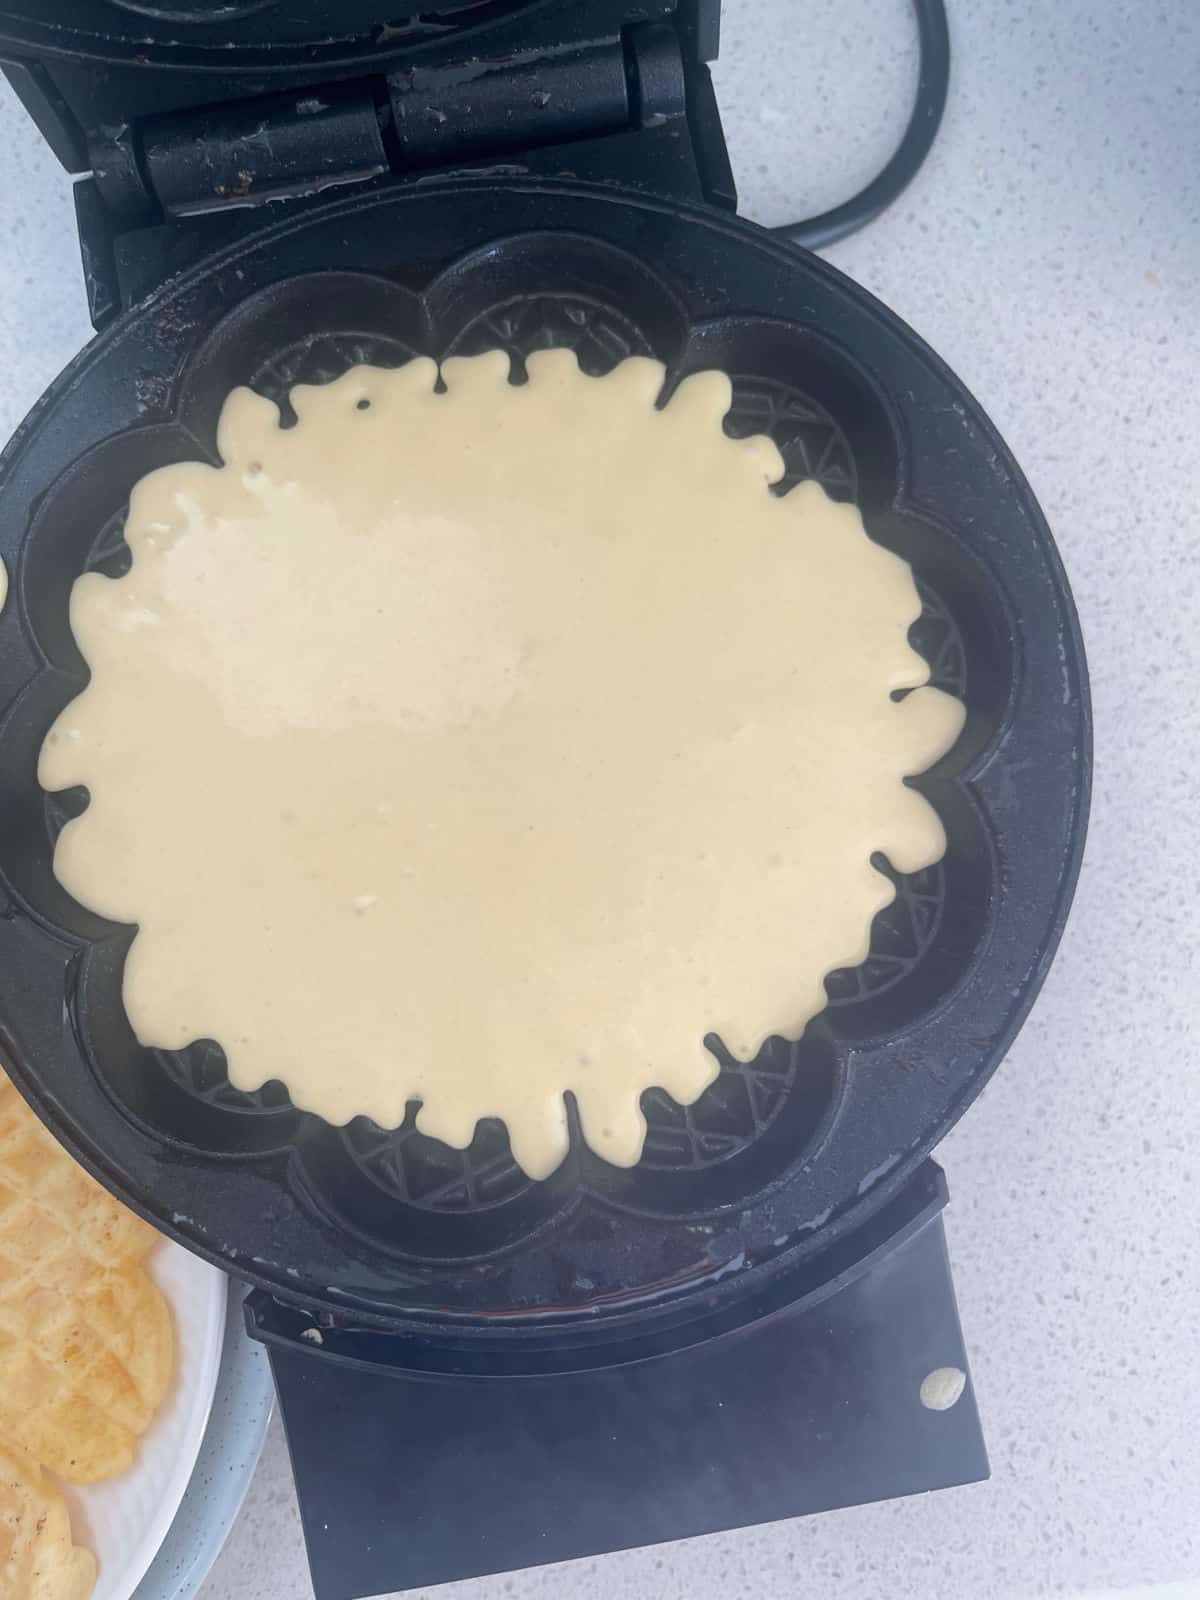 waffle batter in an waffle iron.